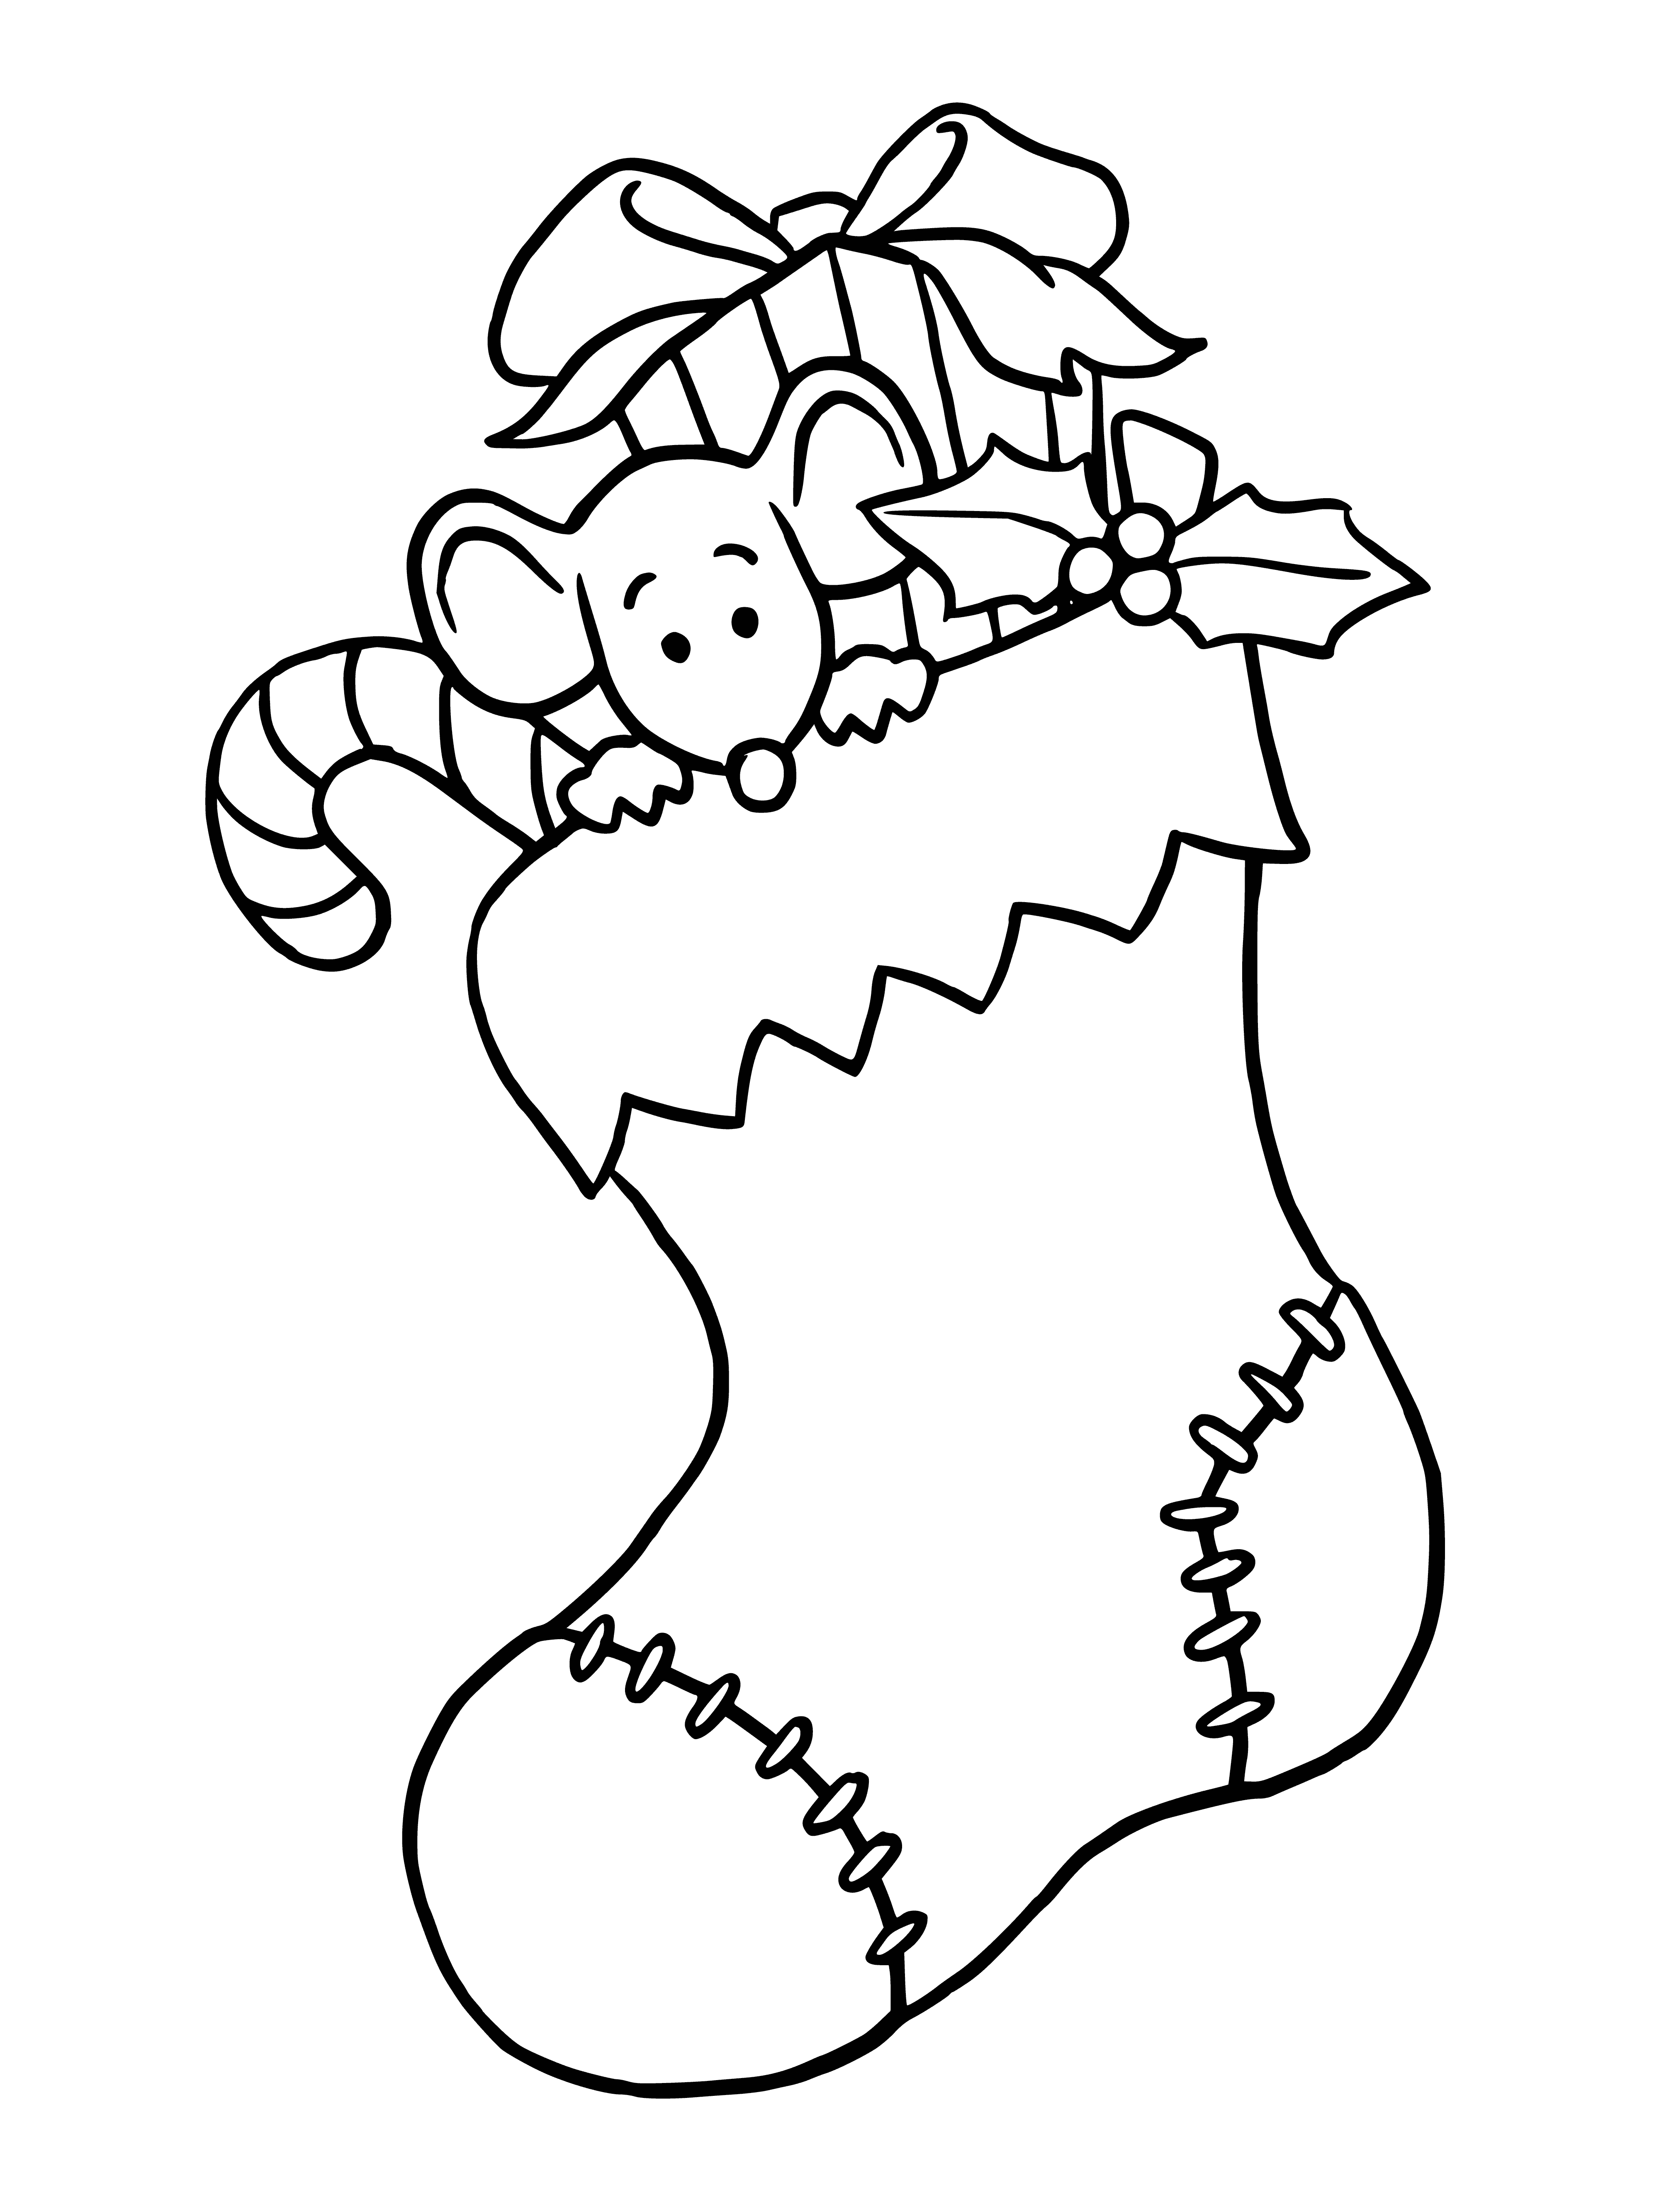 coloring page: Rat perched on red/white striped sock hanging from string, tail wrapped around.